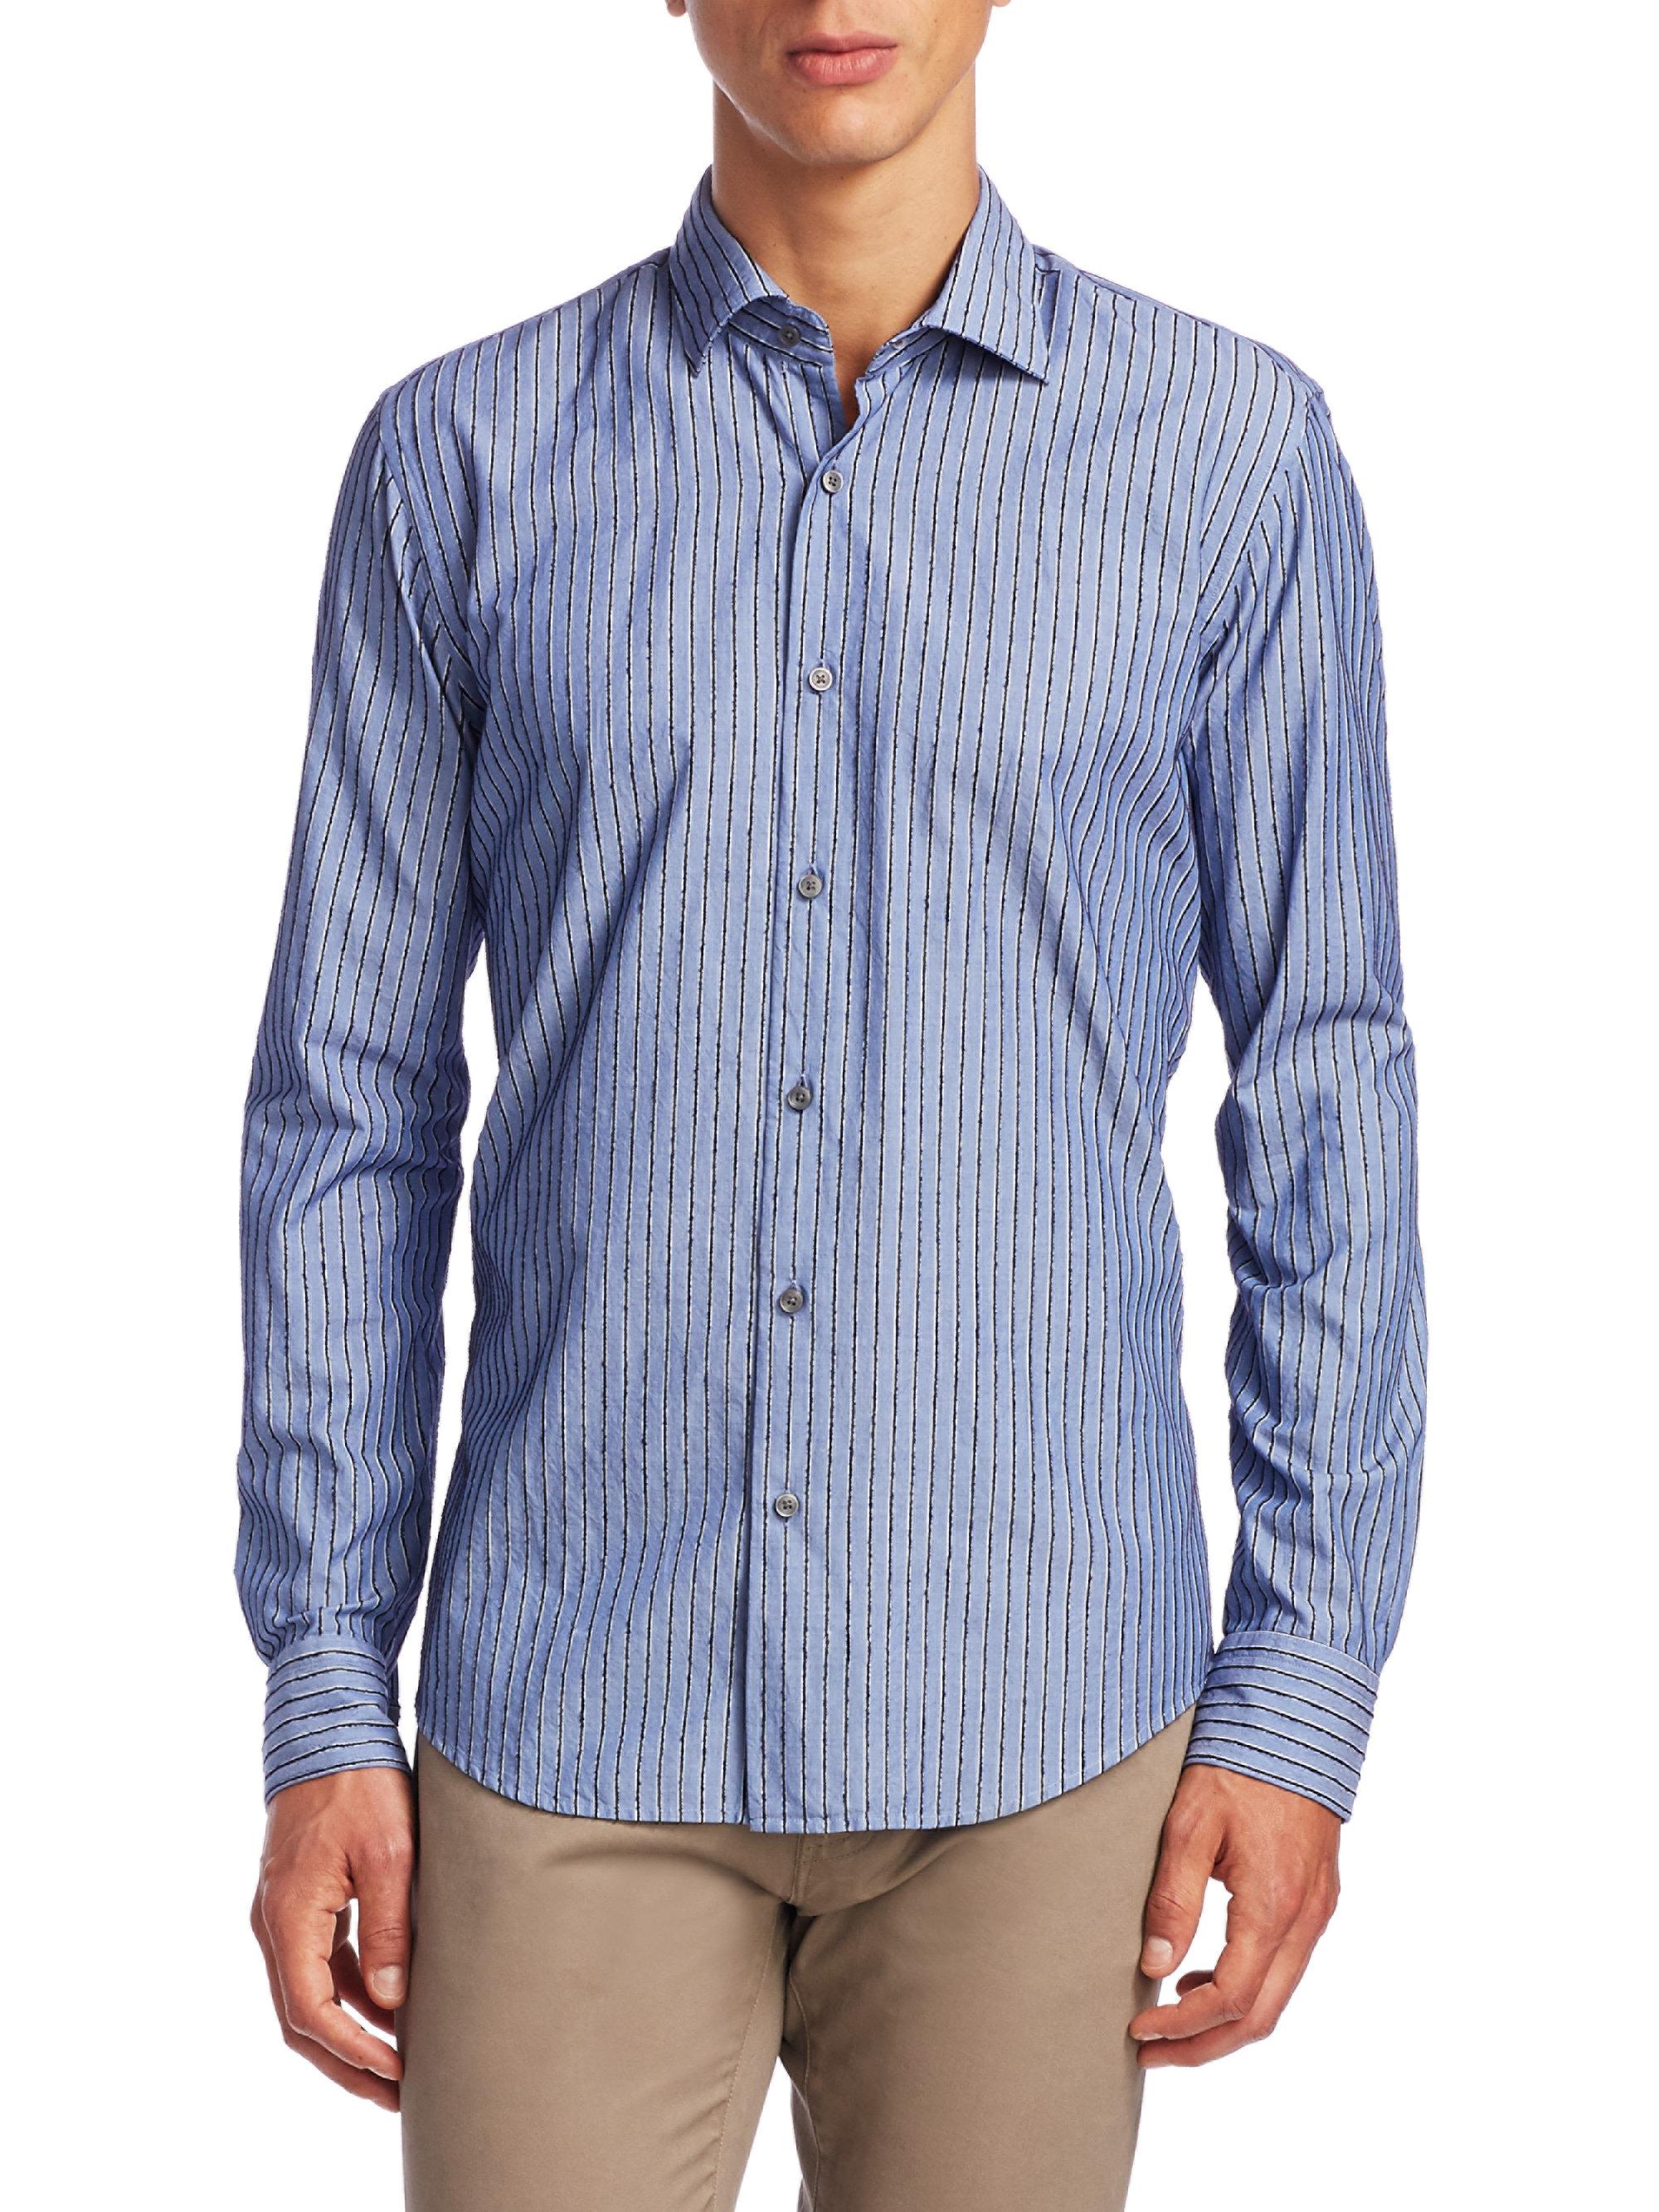 Lyst - Saks Fifth Avenue Collection Stripes Cotton Button-down Shirt in ...